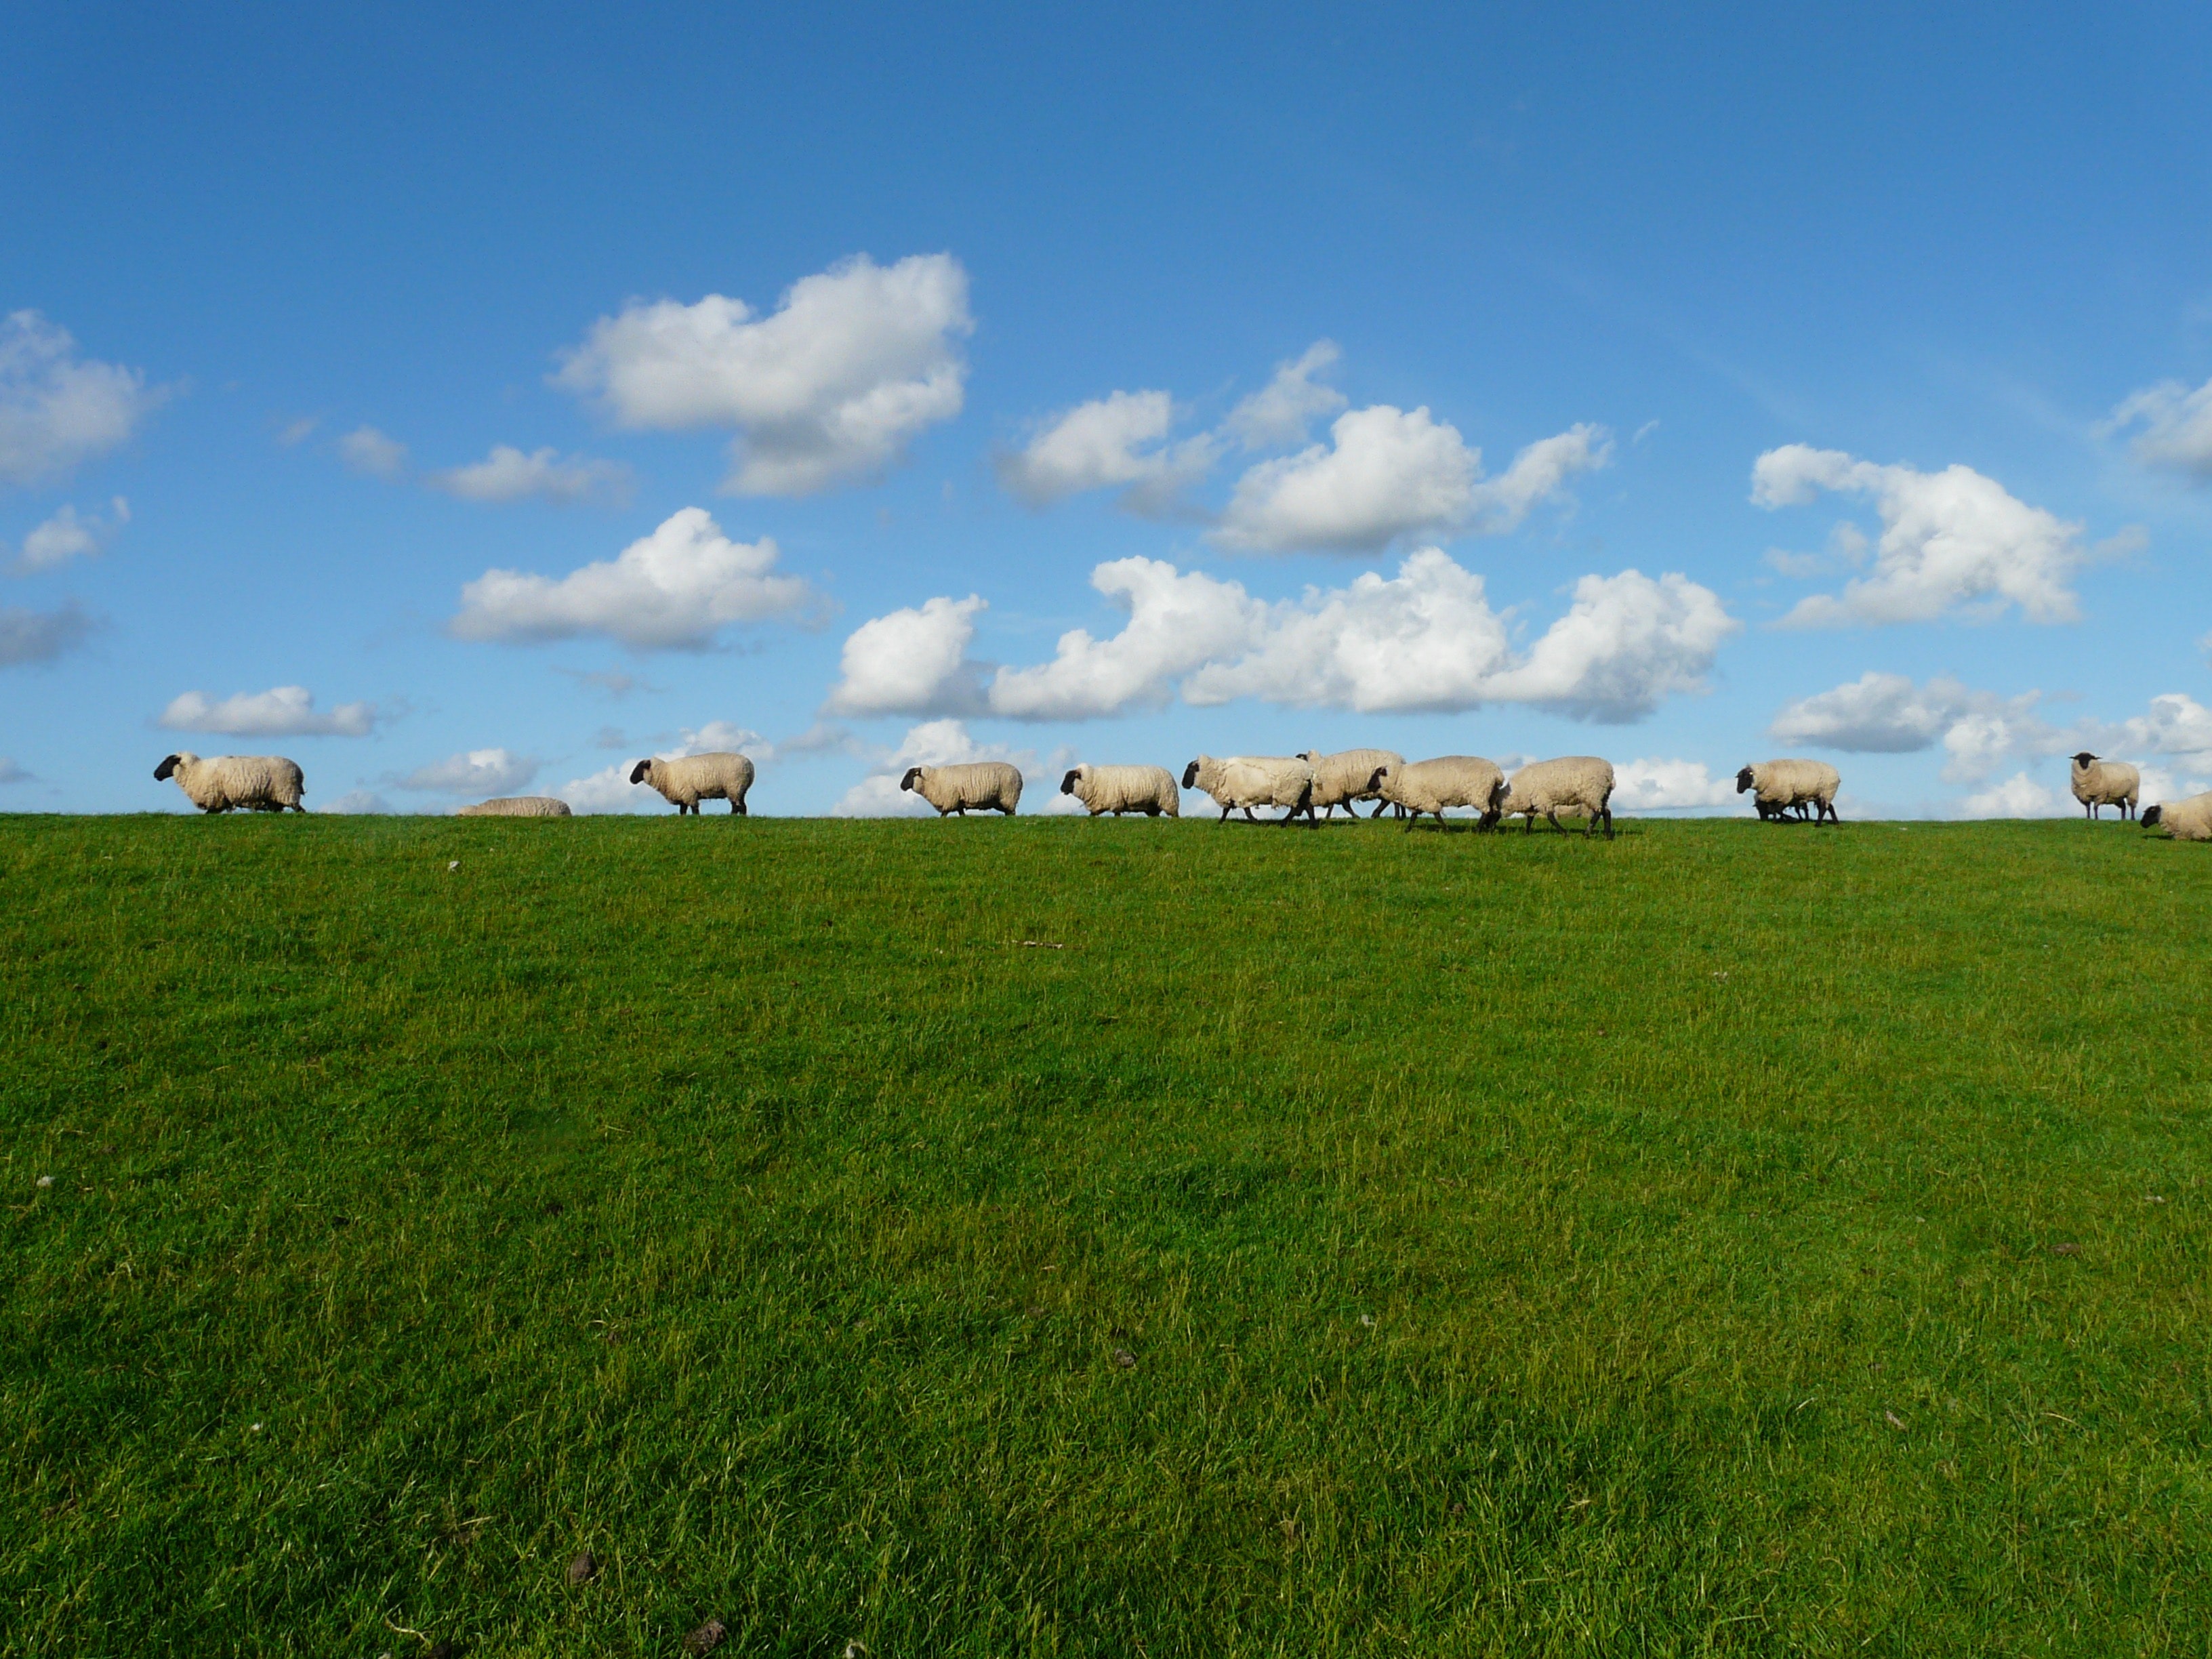 11 white sheep in the grass field photo